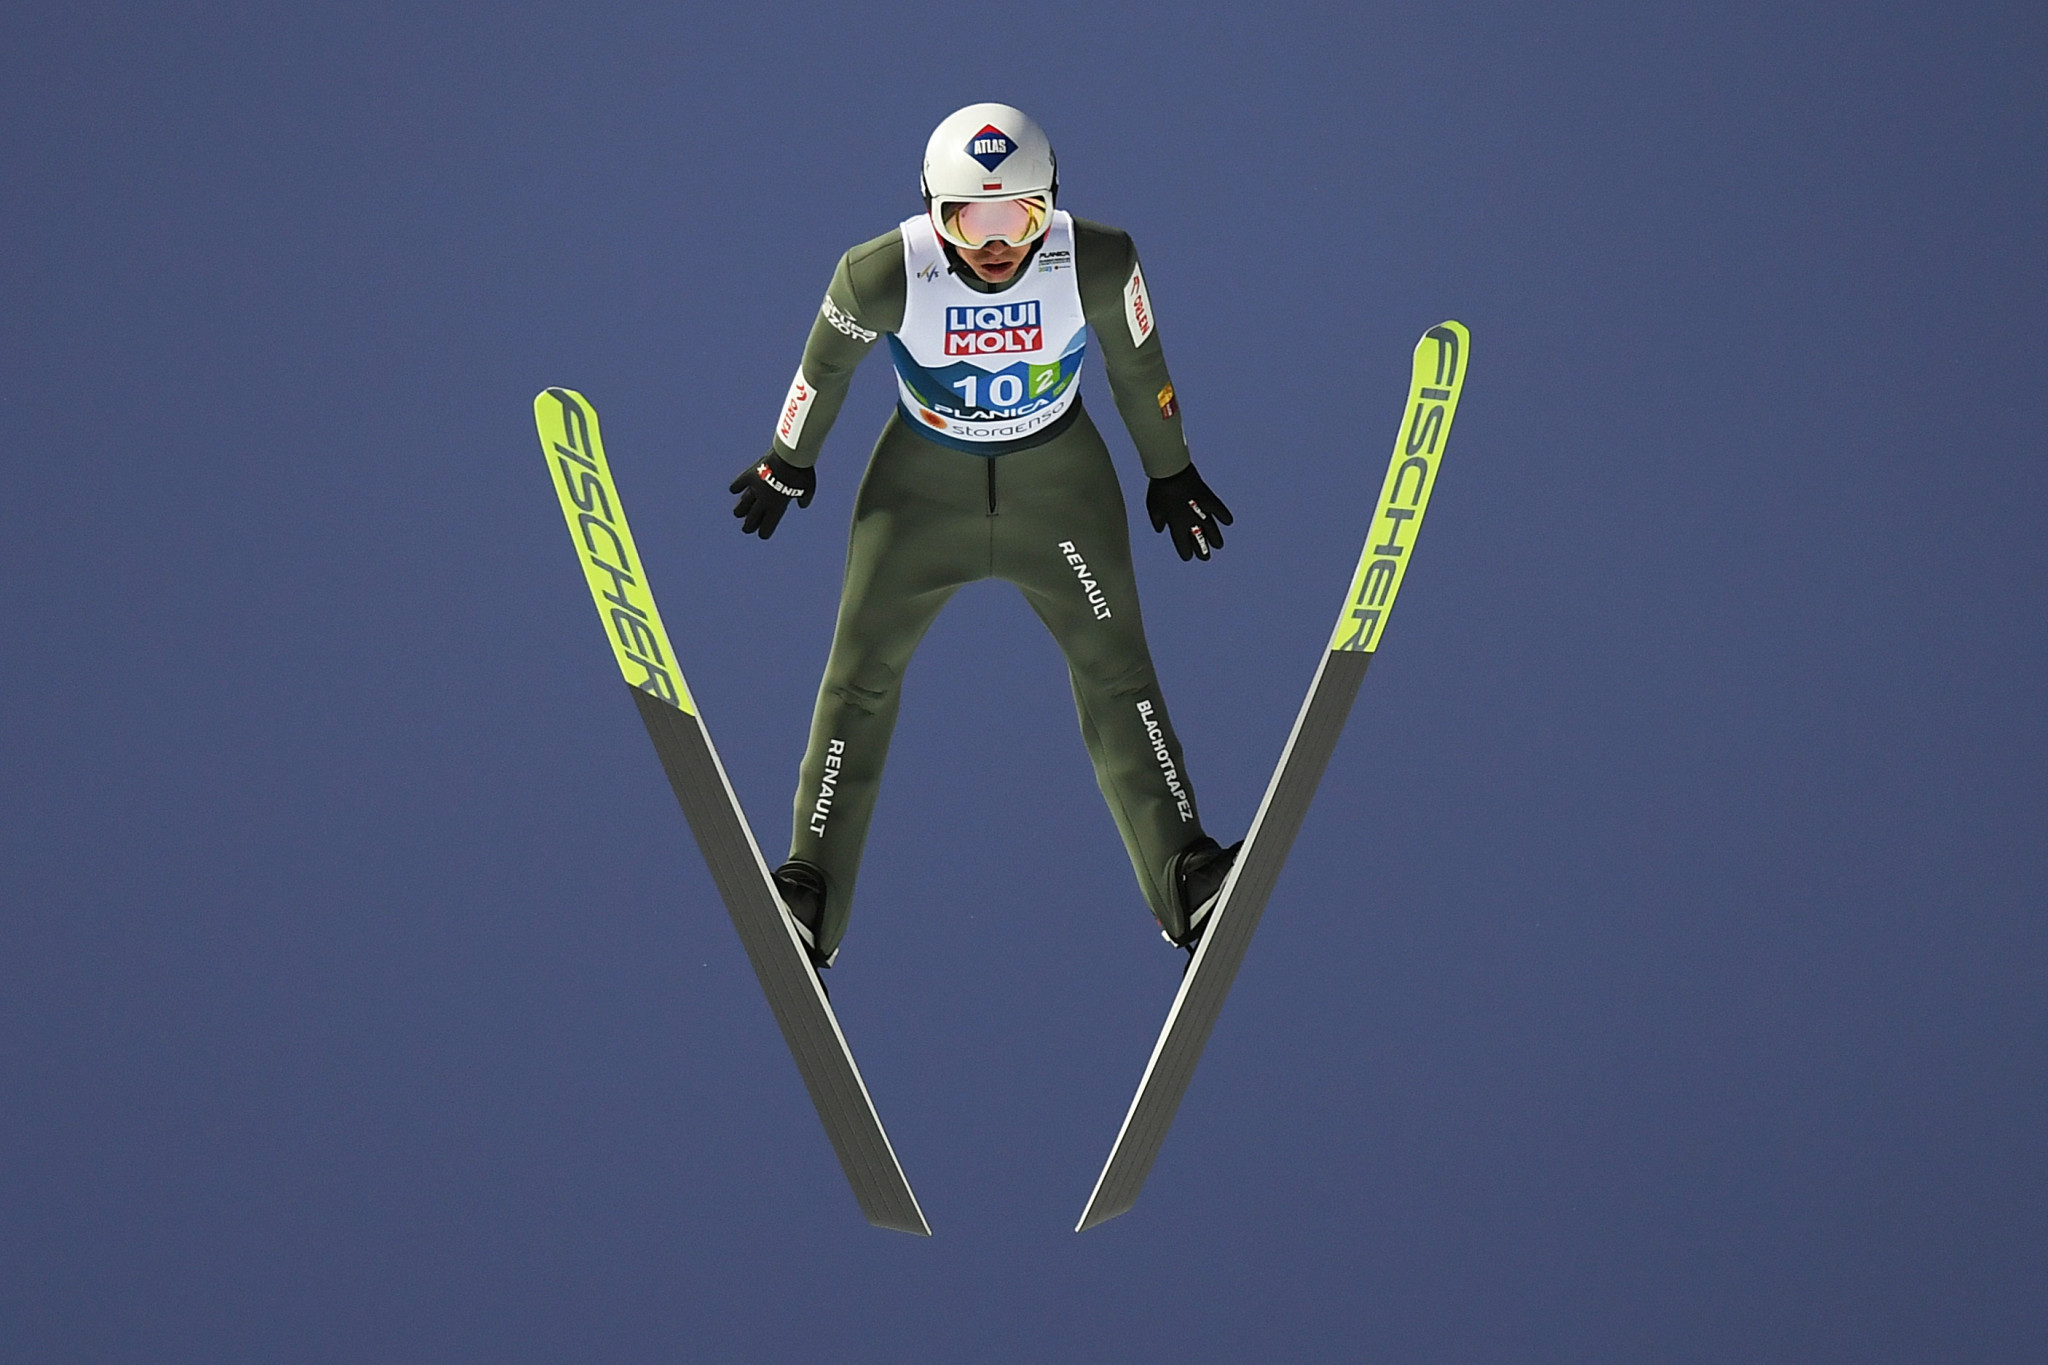 Three-time Olympic gold medallist Kamil Stoch is part of a strong Polish ski jumping team ©Getty Images